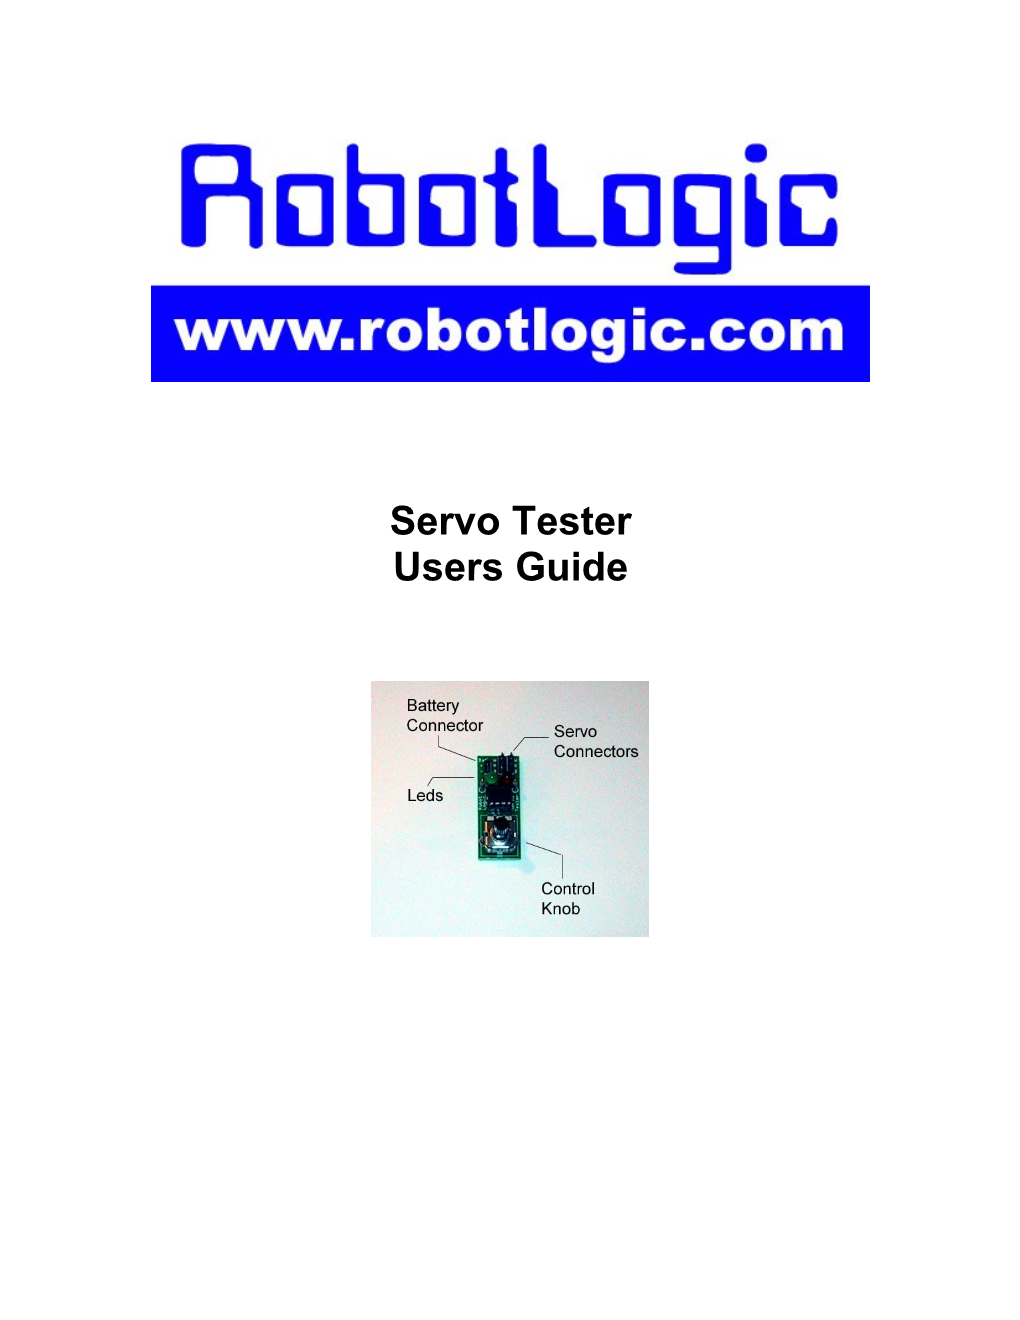 The Robotlogic Servo Tester Uses a Microprocessor to Accurately Reproduce RC Servo Pulses